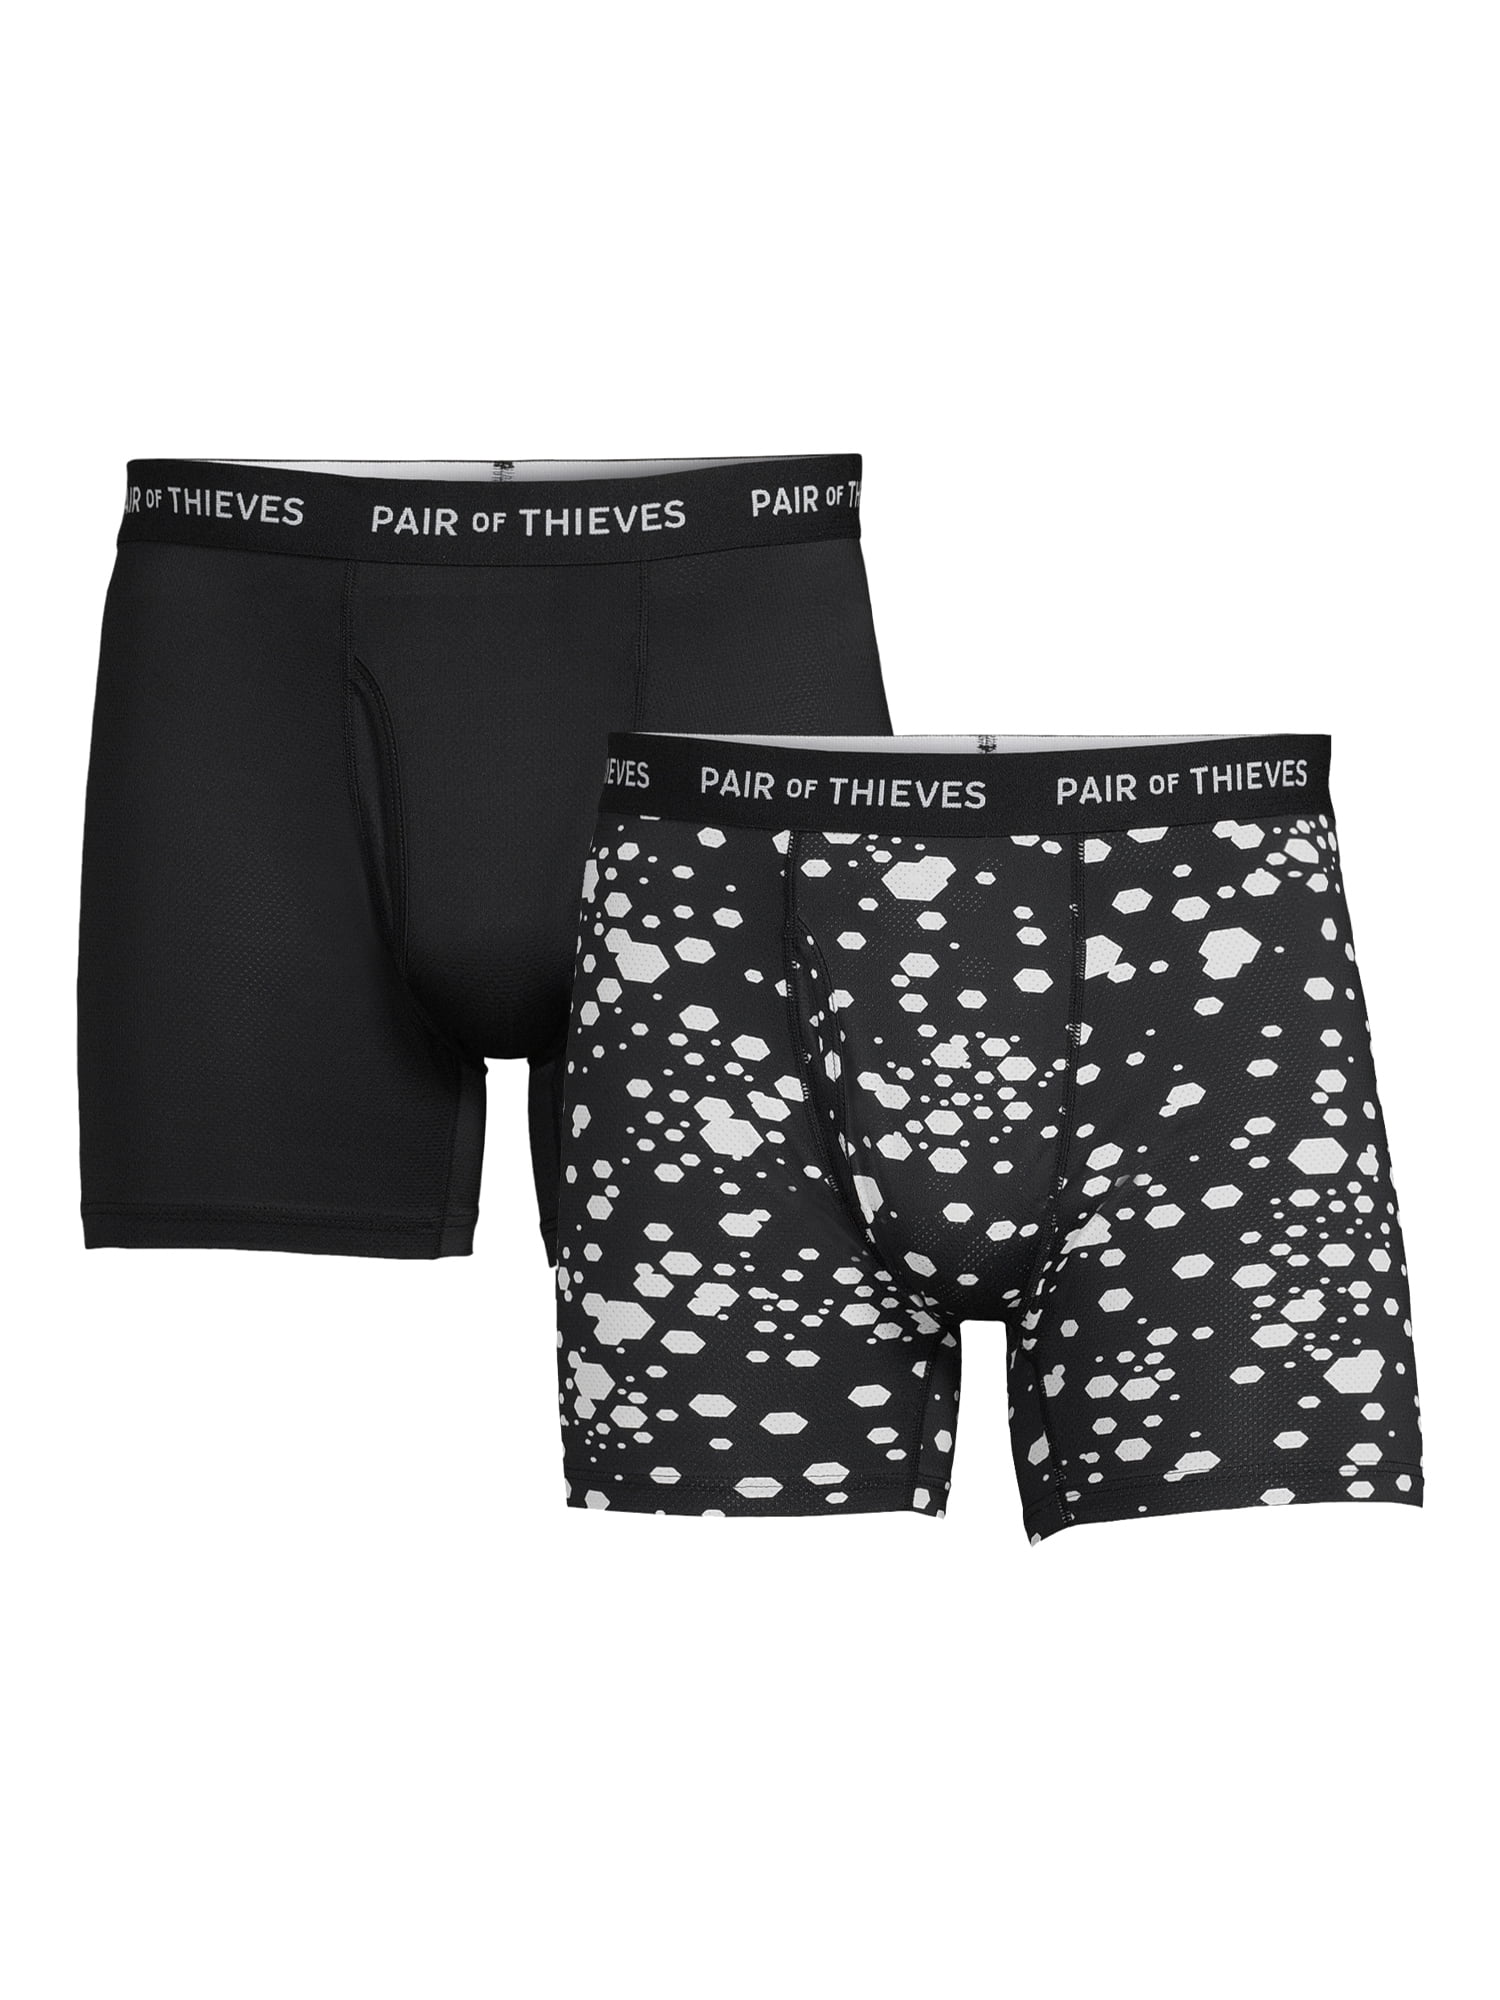 Pair of Thieves Men's Super Fit Boxer Briefs - White/Red, XL